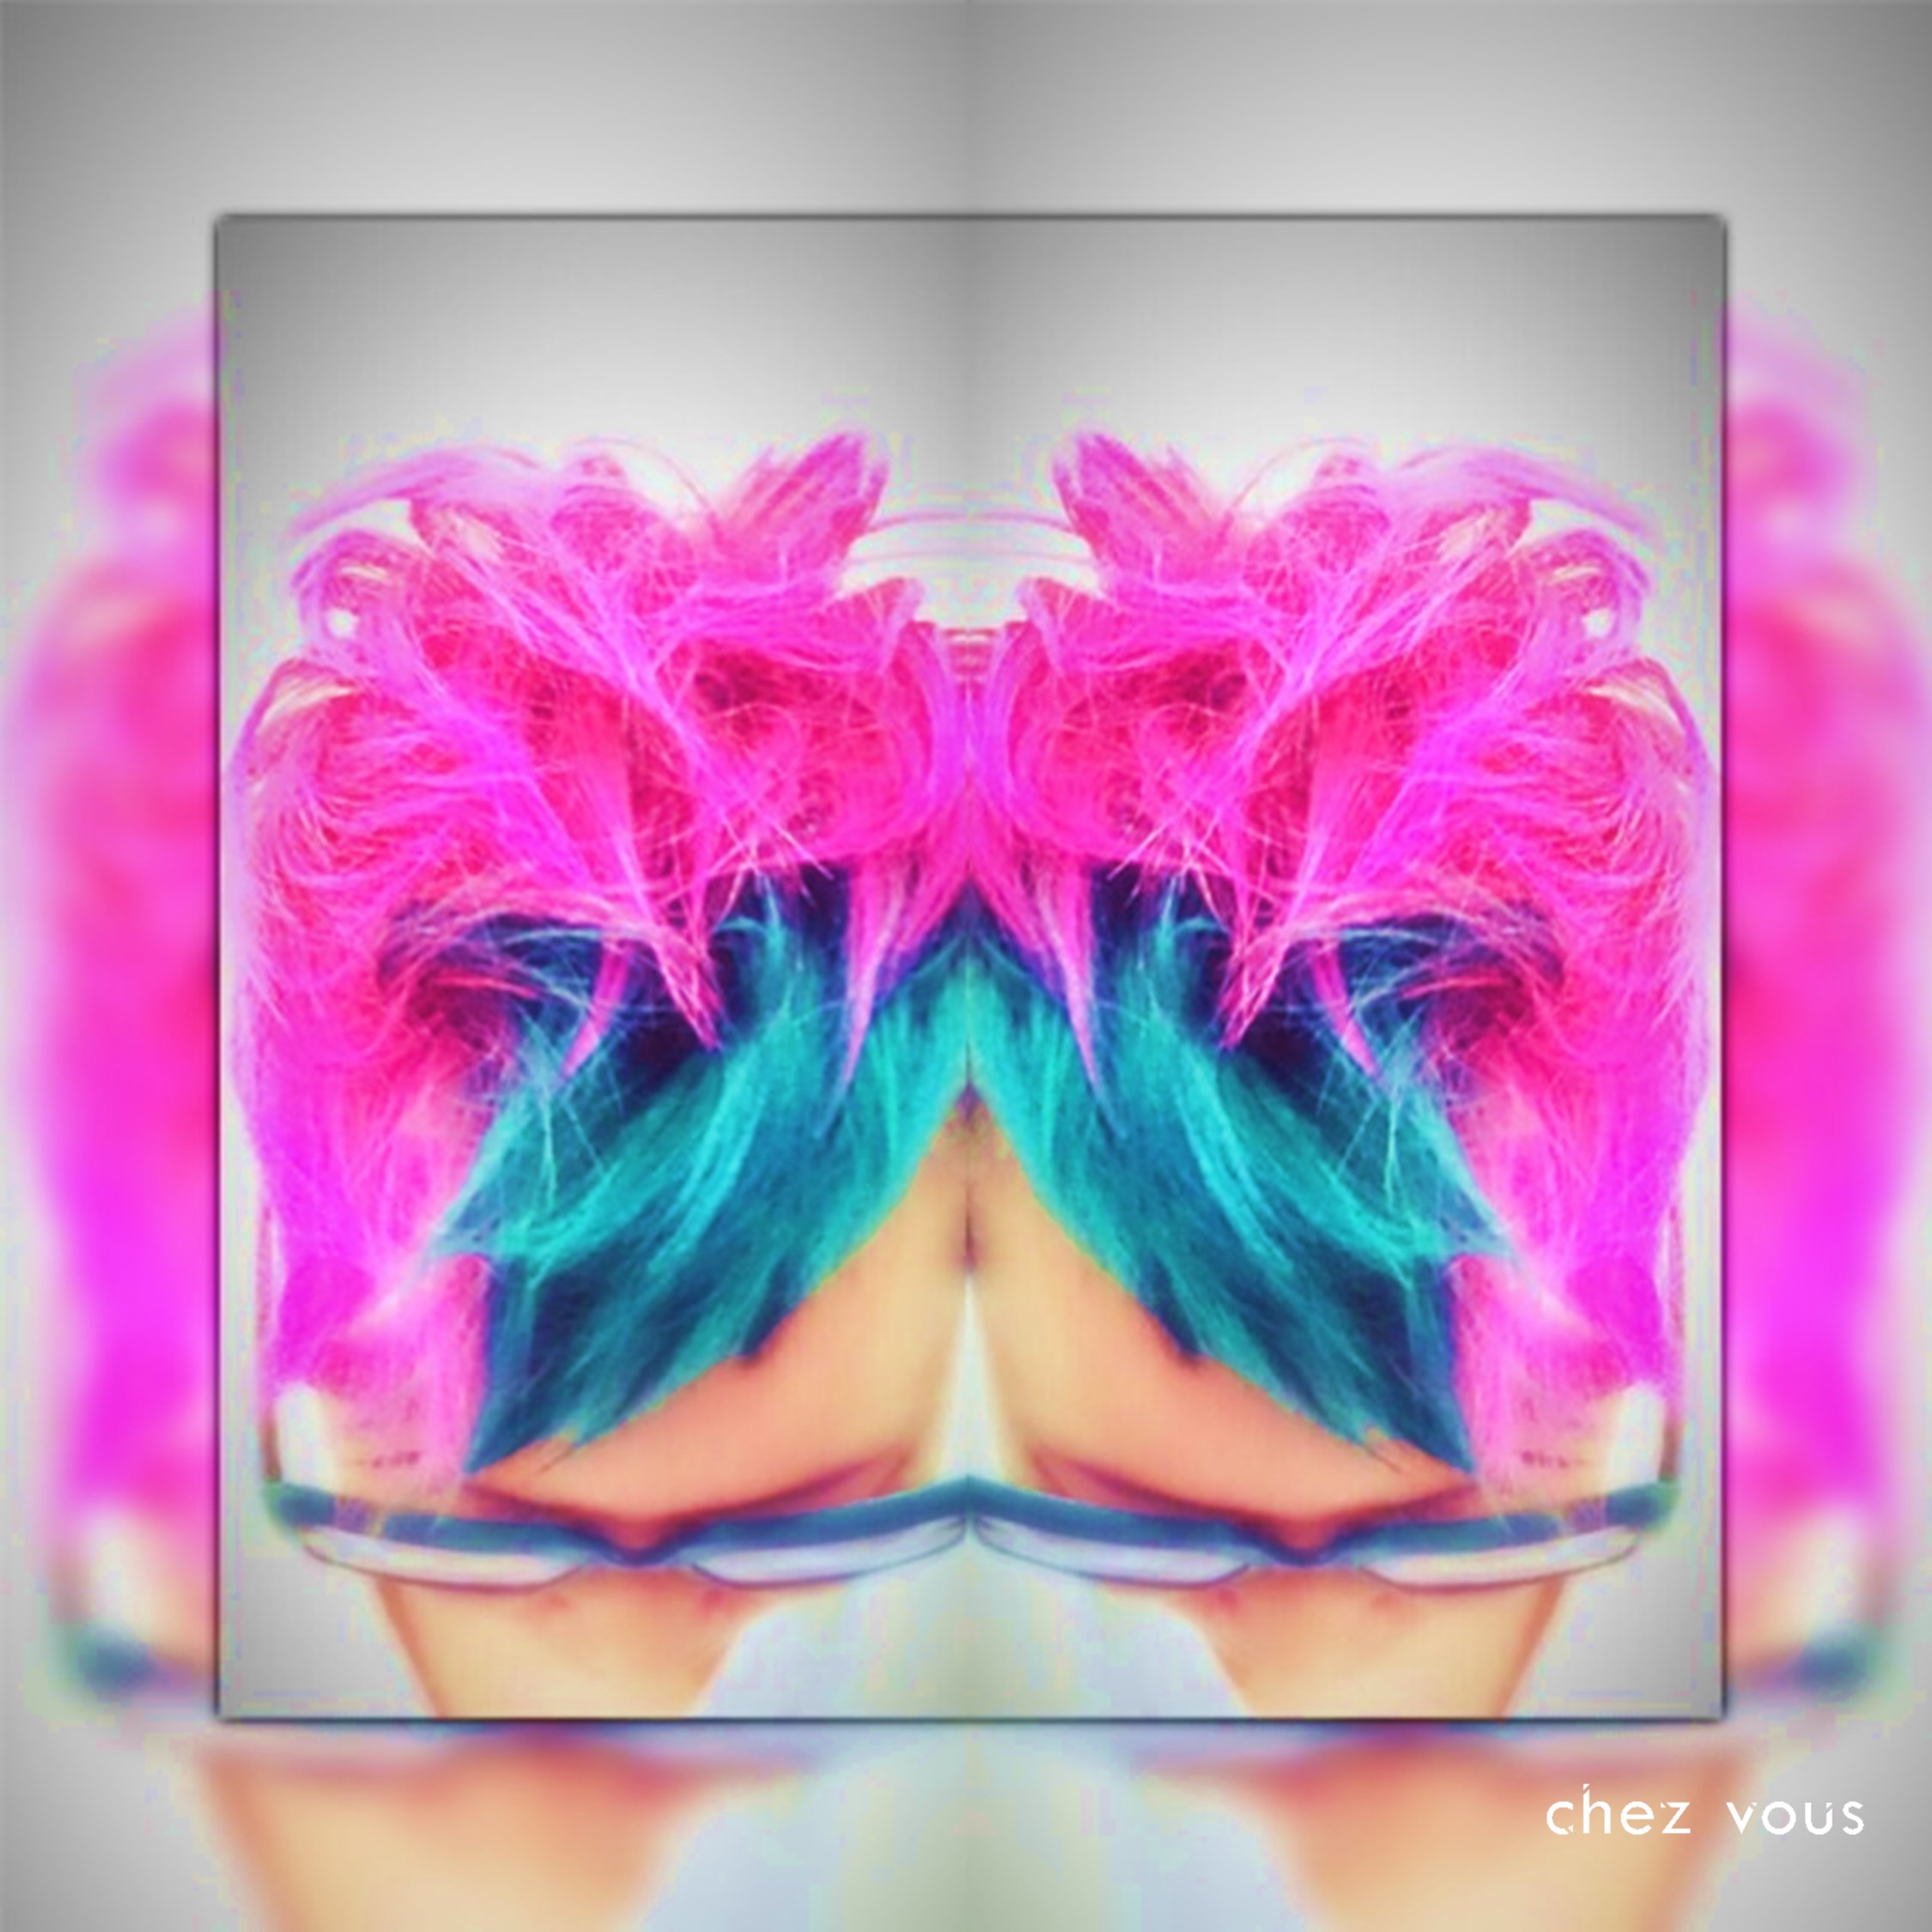 Done by Associate Salon Director of Chez Vous: Readen Chia | Design: Block Hair Colouring with Neon Pink and Turquoise